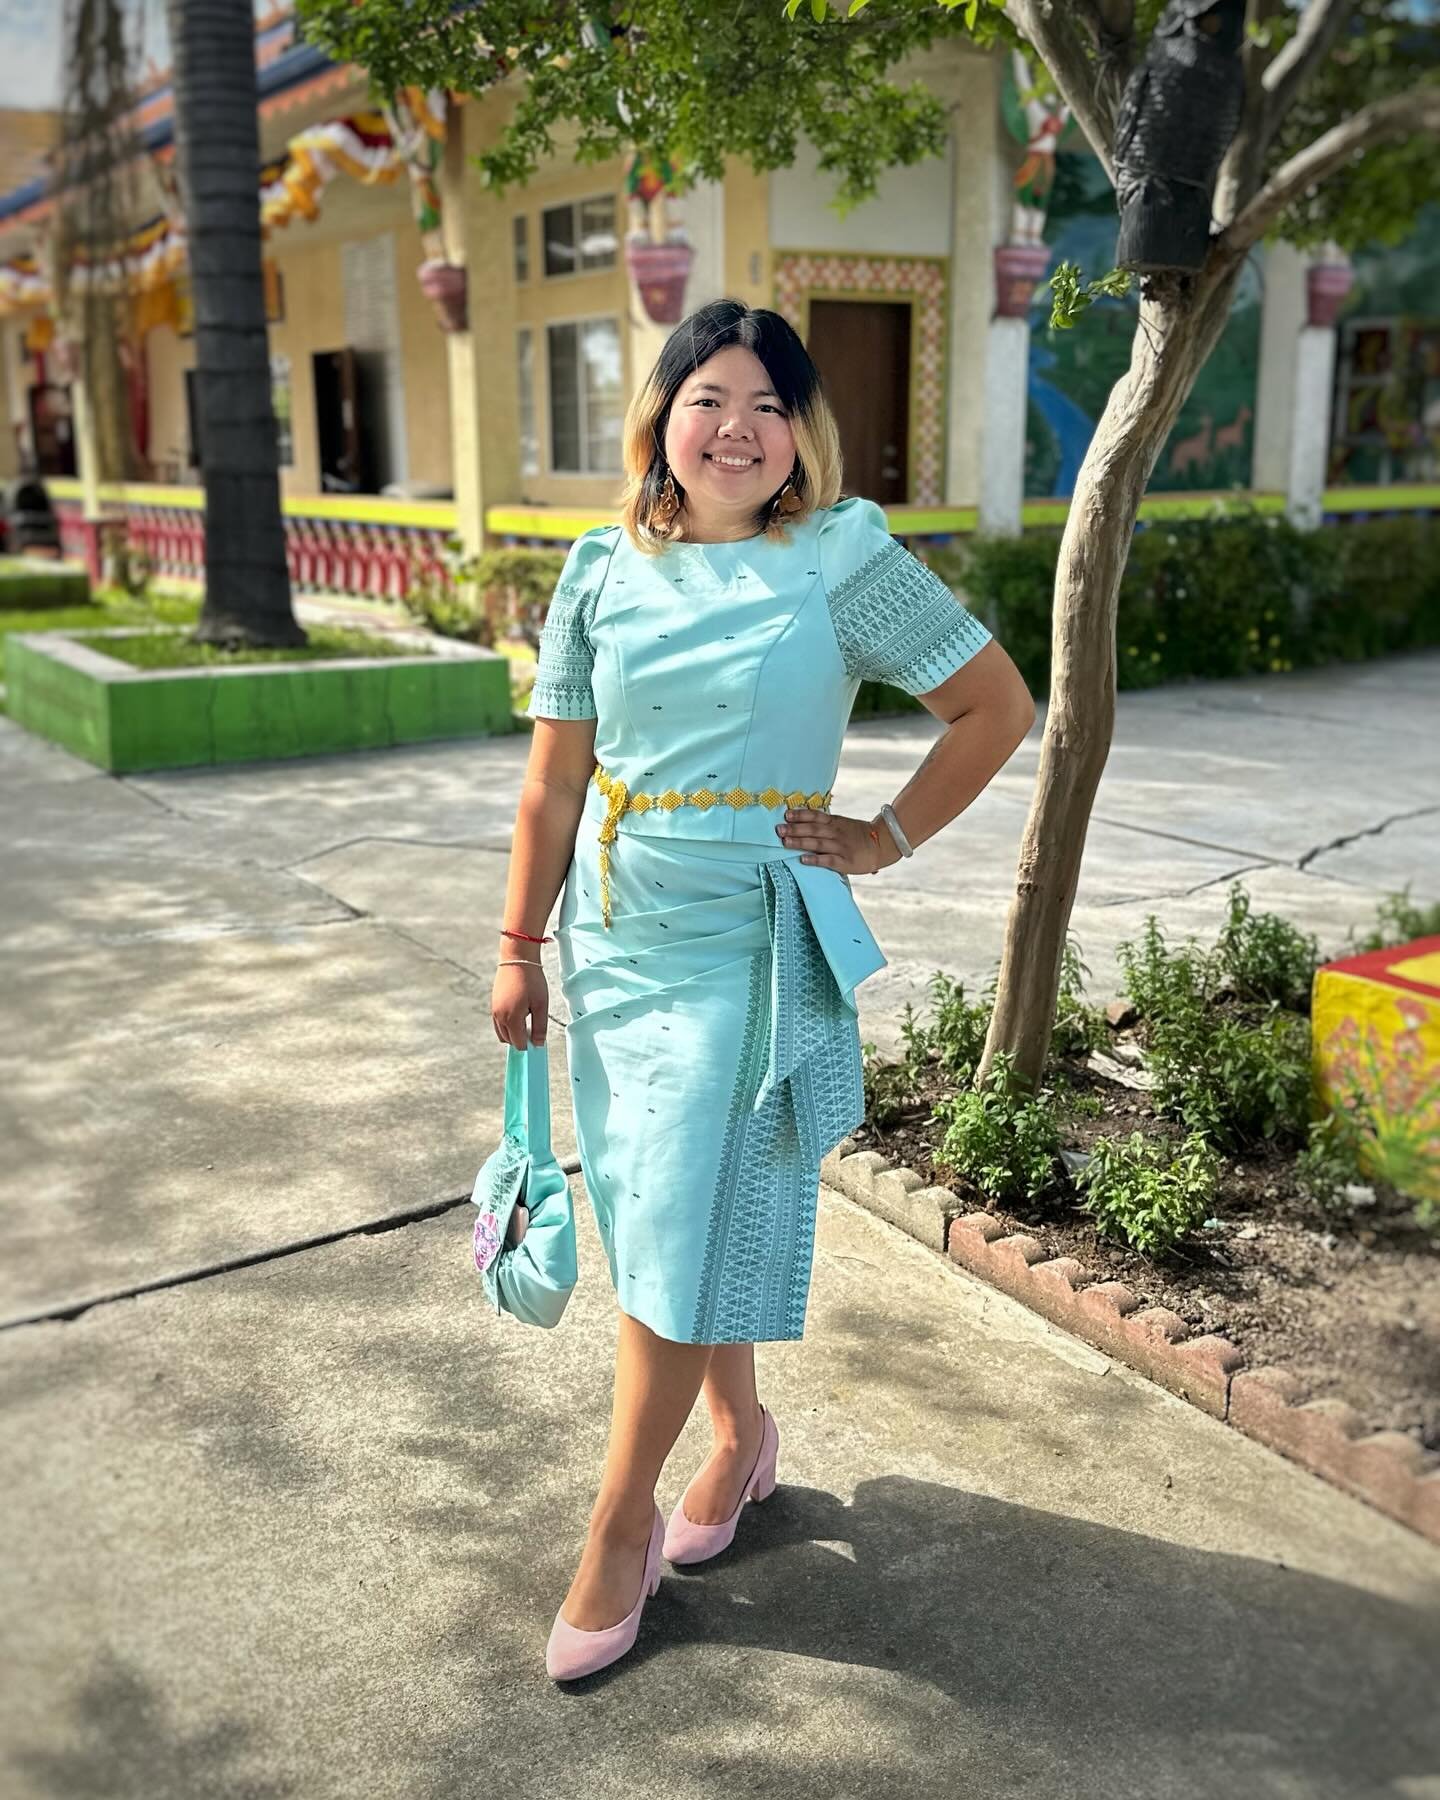 This past year, we worked with @mealeacollection to design this new year set! She looks absolutely gorgeous in this pastel blue seung 2 piece outfit.

The design is versatile, temple ready and can be worn for many other types of occasions. The added 